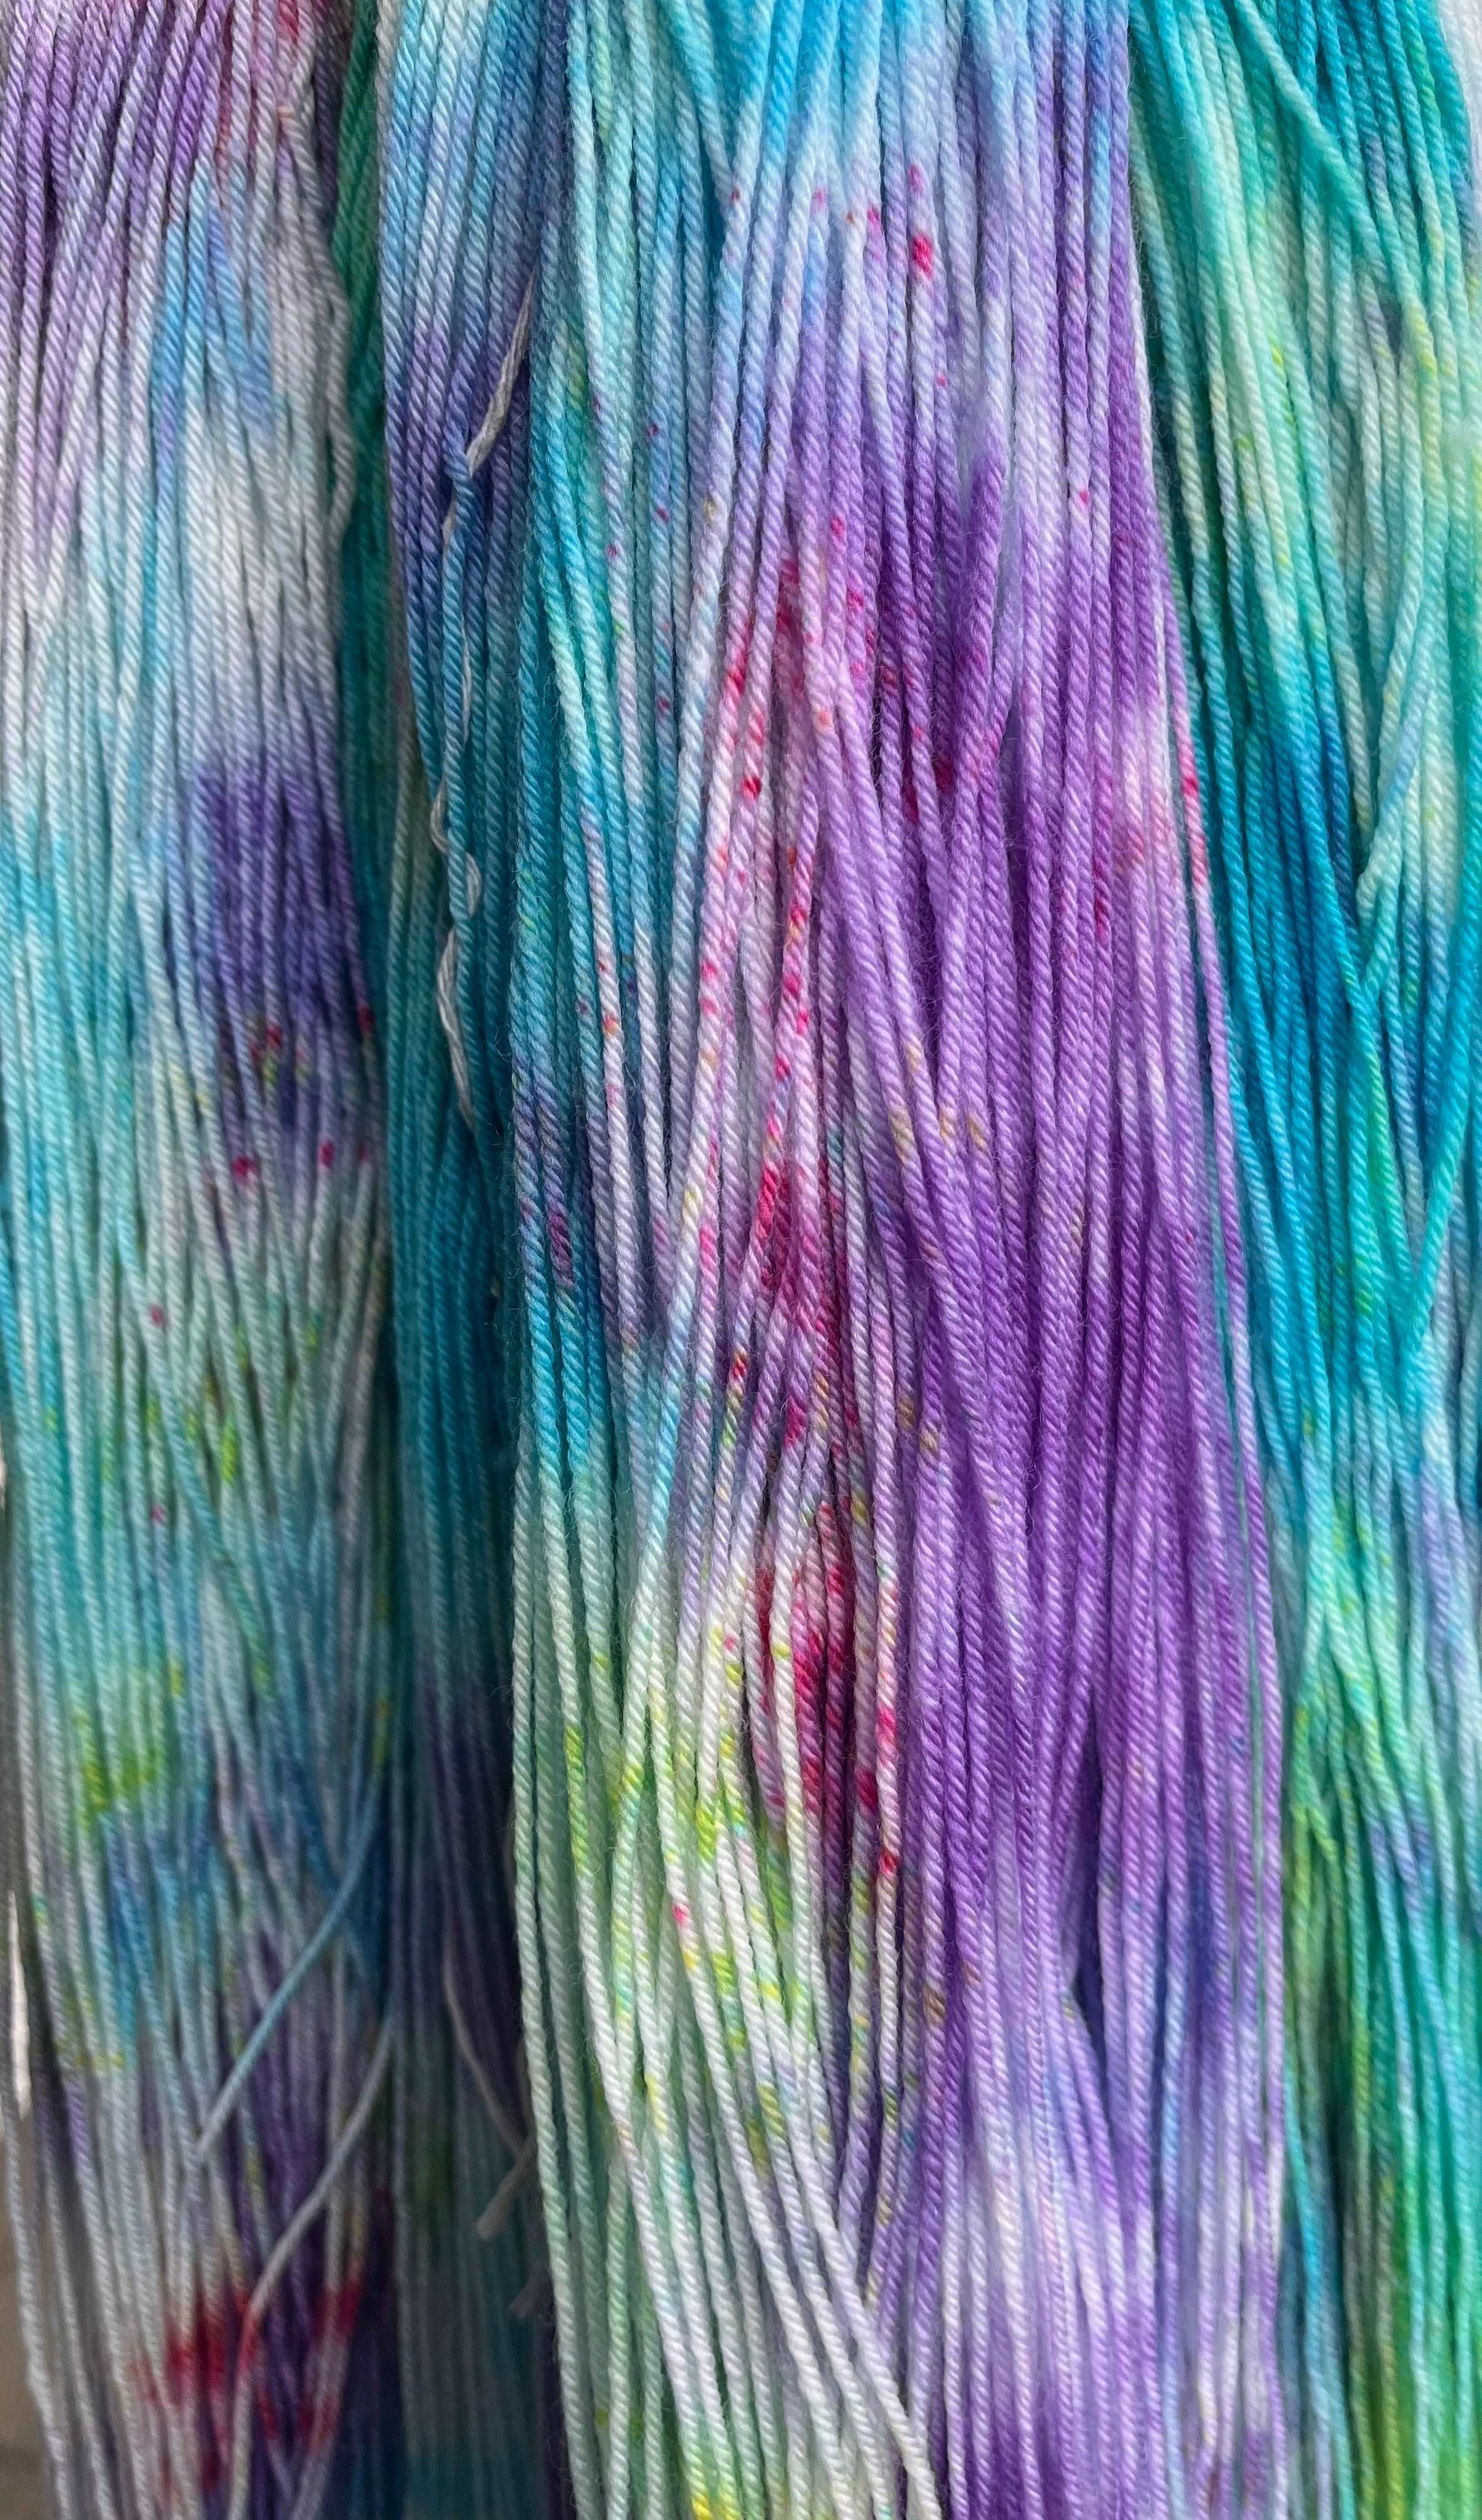 jelly crystals - wool base